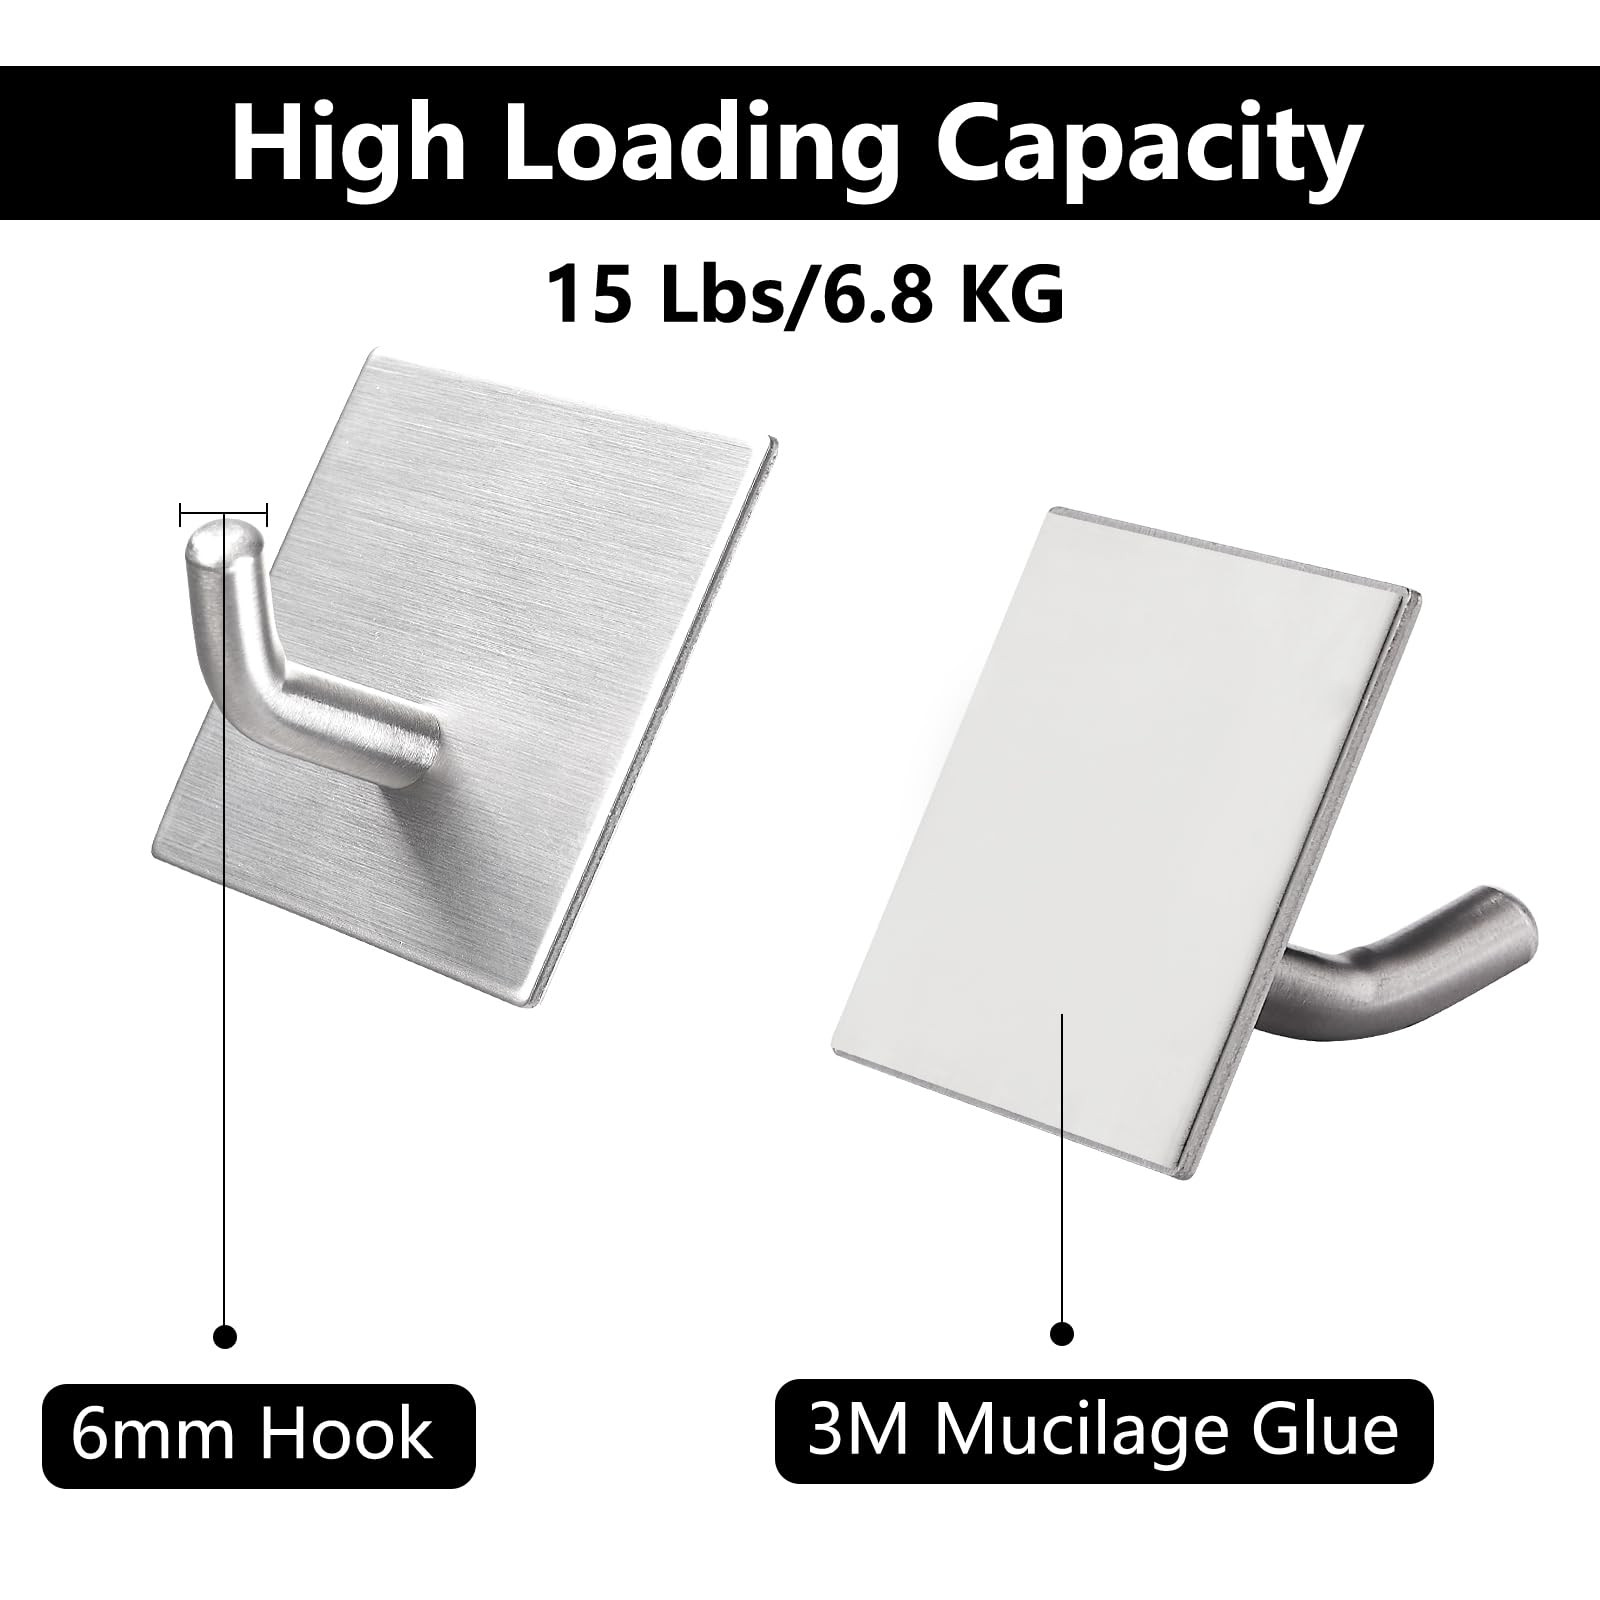 FOMANSH Heavy Duty Adhesive Hooks, Stick on Wall Adhesive Hangers, Strong Stainless  Steel Holder, Self Adhesive